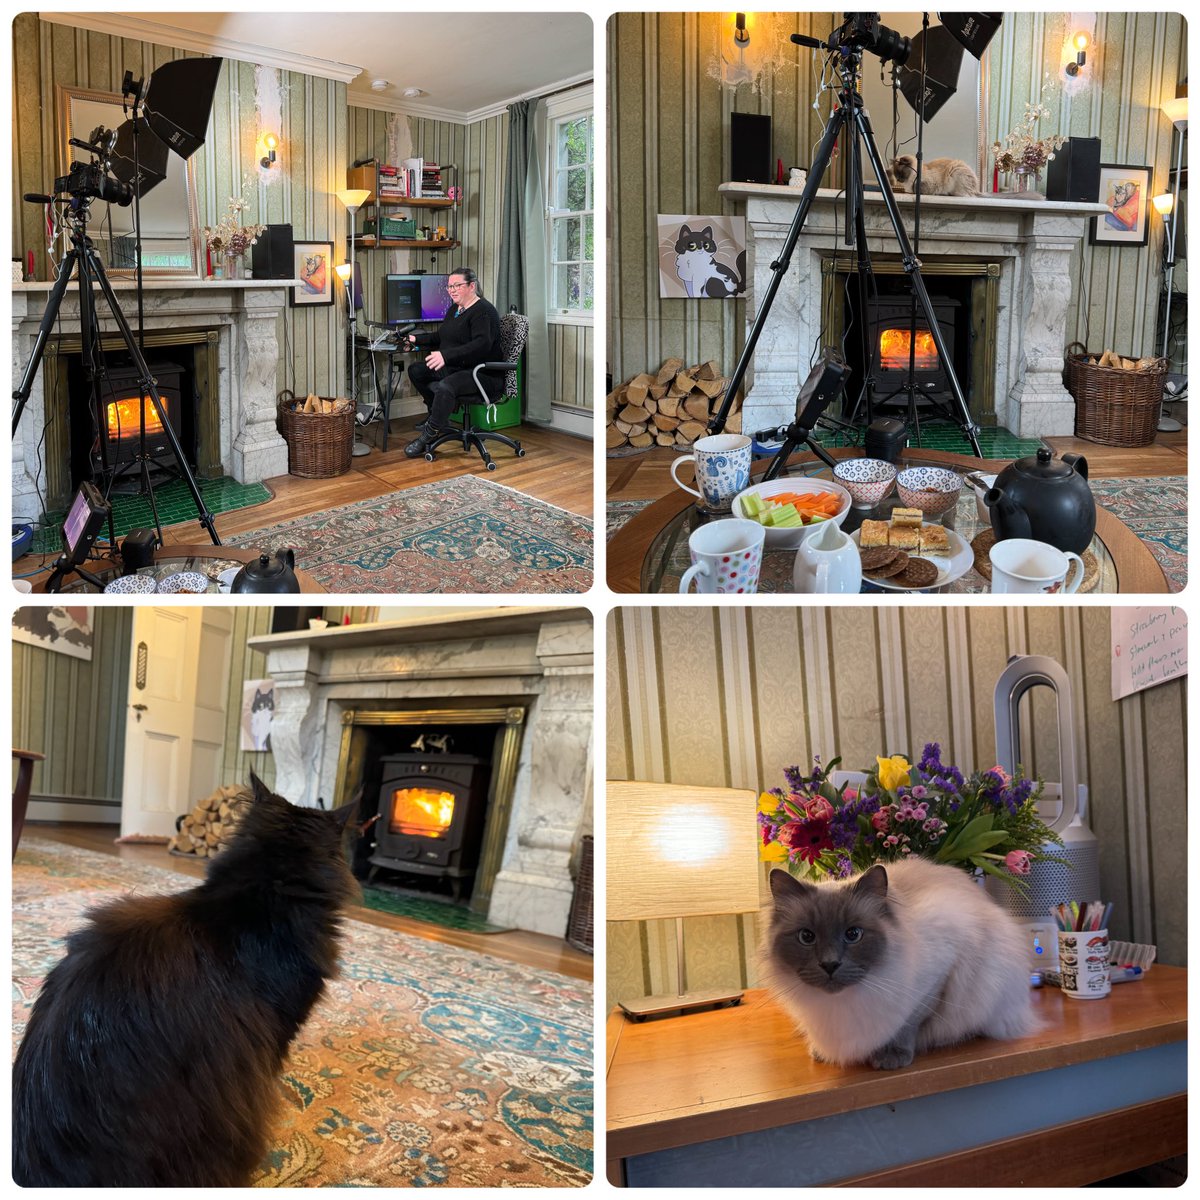 Huge thanks to @lauralifts who is hosting us with tea & snacks at her beautiful house in Kildare as well as speaking rn at @CodingGrace's #CupánTaeConf talk.

Two of her cats are very welcoming & soooo cute!

#TechTalks #Community #CupánTae